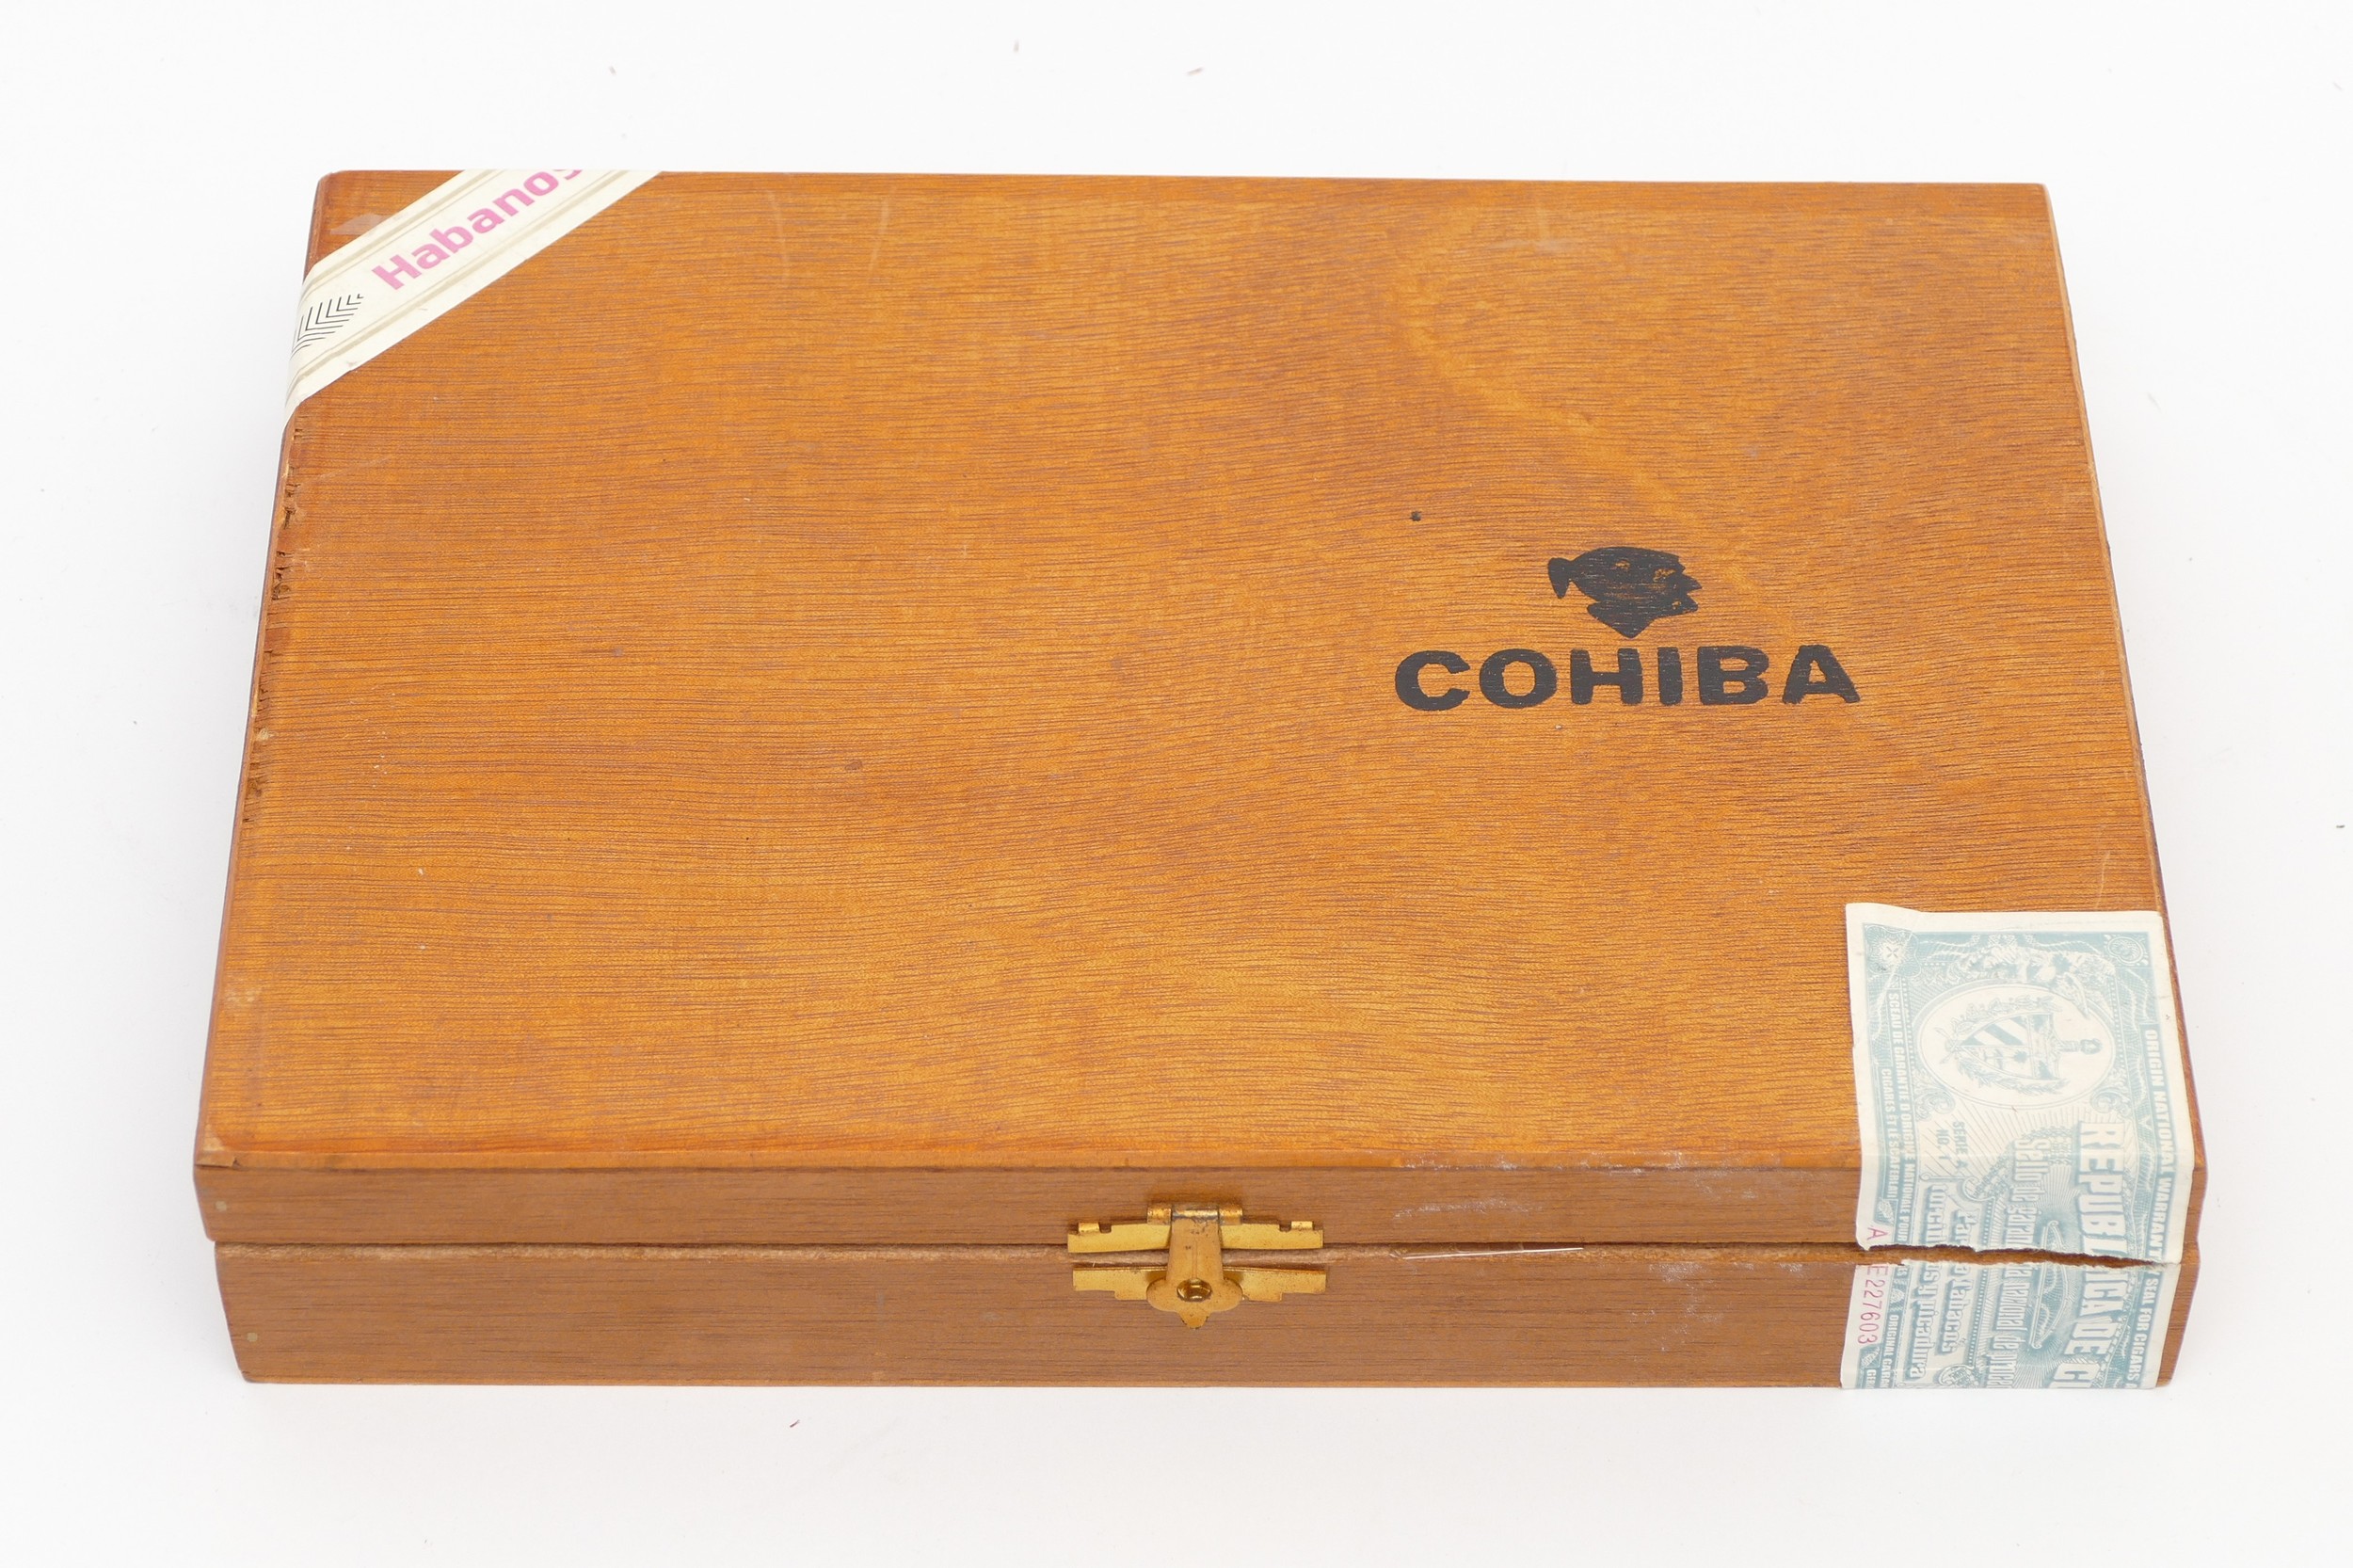 *** WITHDRAWN FROM AUCTION *** Cohiba, twenty three cigars in a wooden case, serial number AE227603 - Image 3 of 4